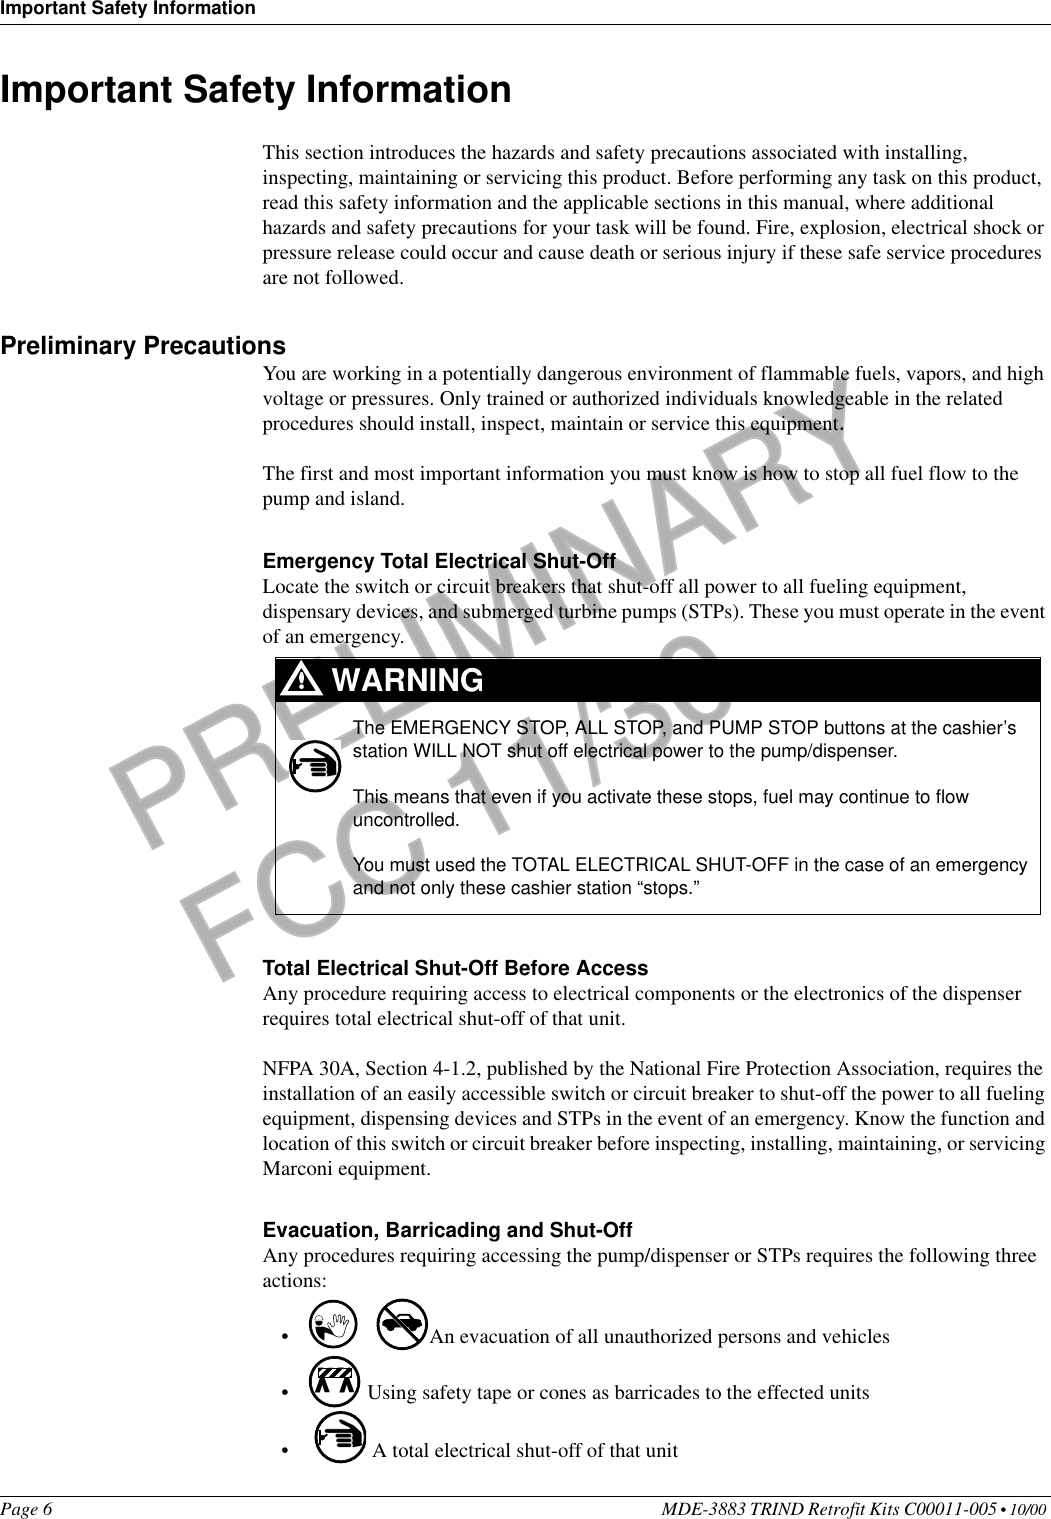 Important Safety InformationPage 6 MDE-3883 TRIND Retrofit Kits C00011-005 • 10/00 PRELIMINARYFCC 11/30Important Safety InformationThis section introduces the hazards and safety precautions associated with installing, inspecting, maintaining or servicing this product. Before performing any task on this product, read this safety information and the applicable sections in this manual, where additional hazards and safety precautions for your task will be found. Fire, explosion, electrical shock or pressure release could occur and cause death or serious injury if these safe service procedures are not followed. Preliminary PrecautionsYou are working in a potentially dangerous environment of flammable fuels, vapors, and high voltage or pressures. Only trained or authorized individuals knowledgeable in the related procedures should install, inspect, maintain or service this equipment.The first and most important information you must know is how to stop all fuel flow to the pump and island.Emergency Total Electrical Shut-OffLocate the switch or circuit breakers that shut-off all power to all fueling equipment, dispensary devices, and submerged turbine pumps (STPs). These you must operate in the event of an emergency.Total Electrical Shut-Off Before AccessAny procedure requiring access to electrical components or the electronics of the dispenser requires total electrical shut-off of that unit. NFPA 30A, Section 4-1.2, published by the National Fire Protection Association, requires the installation of an easily accessible switch or circuit breaker to shut-off the power to all fueling equipment, dispensing devices and STPs in the event of an emergency. Know the function and location of this switch or circuit breaker before inspecting, installing, maintaining, or servicing Marconi equipment.Evacuation, Barricading and Shut-OffAny procedures requiring accessing the pump/dispenser or STPs requires the following three actions:• An evacuation of all unauthorized persons and vehicles • Using safety tape or cones as barricades to the effected units• A total electrical shut-off of that unitThe EMERGENCY STOP, ALL STOP, and PUMP STOP buttons at the cashier’s station WILL NOT shut off electrical power to the pump/dispenser. This means that even if you activate these stops, fuel may continue to flow uncontrolled. You must used the TOTAL ELECTRICAL SHUT-OFF in the case of an emergency and not only these cashier station “stops.”WARNING